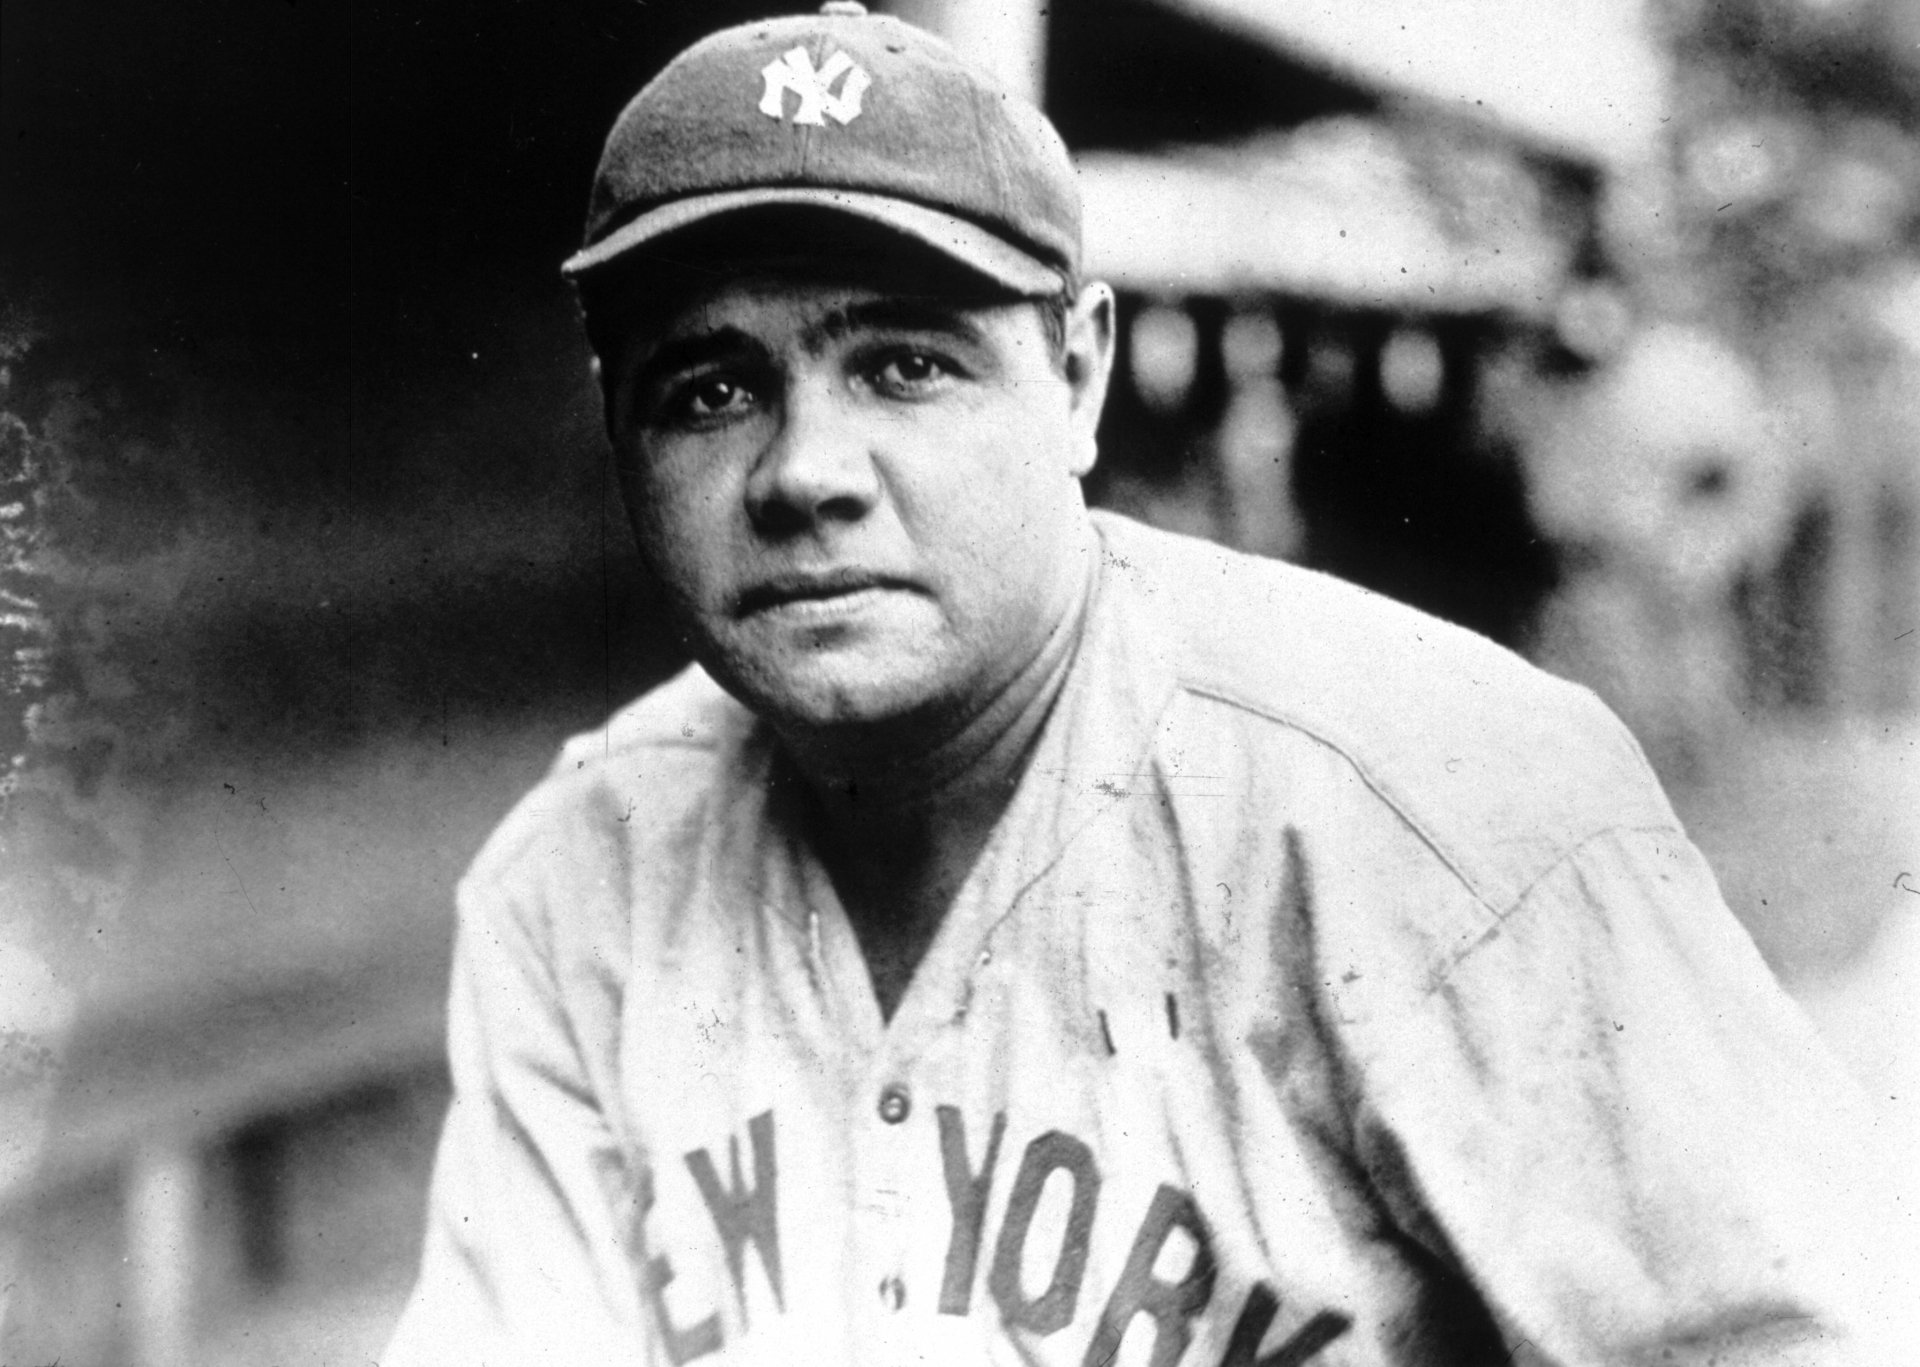 wallpaper babe ruth color